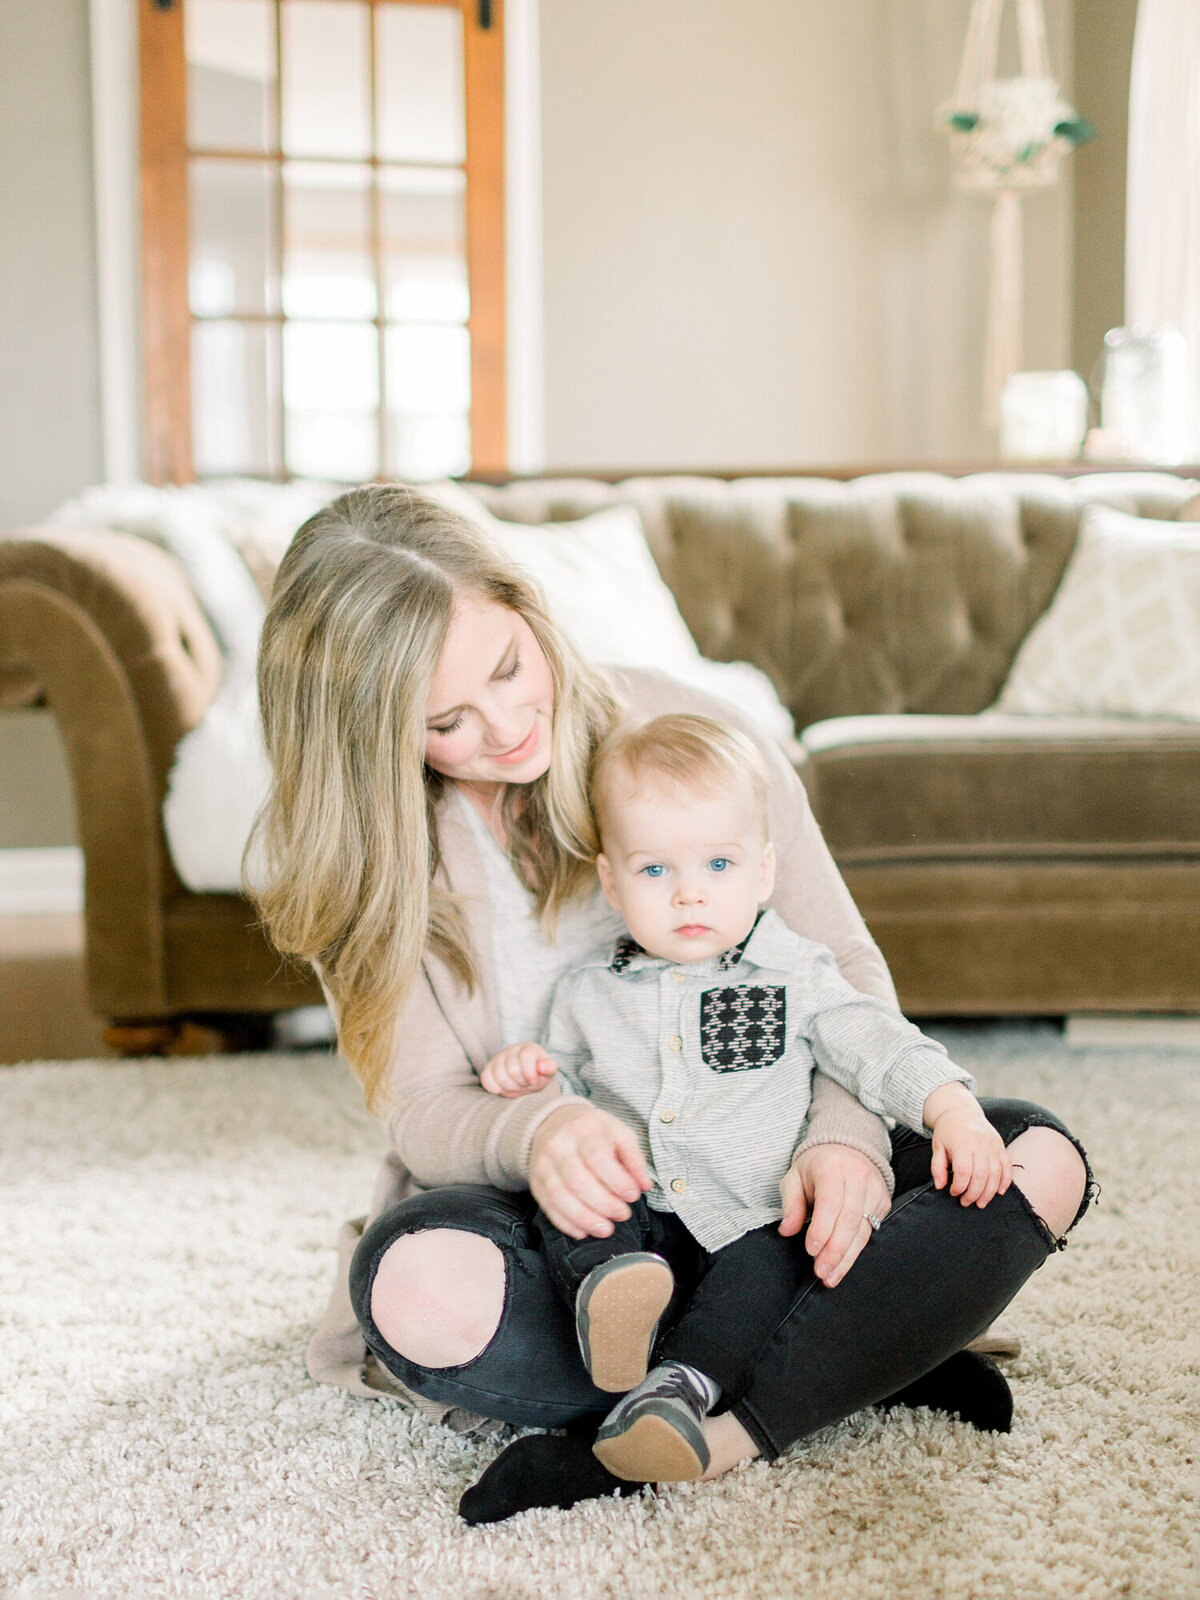 at-home-one-year-old-session-iver-shaunae-teske-photography-23